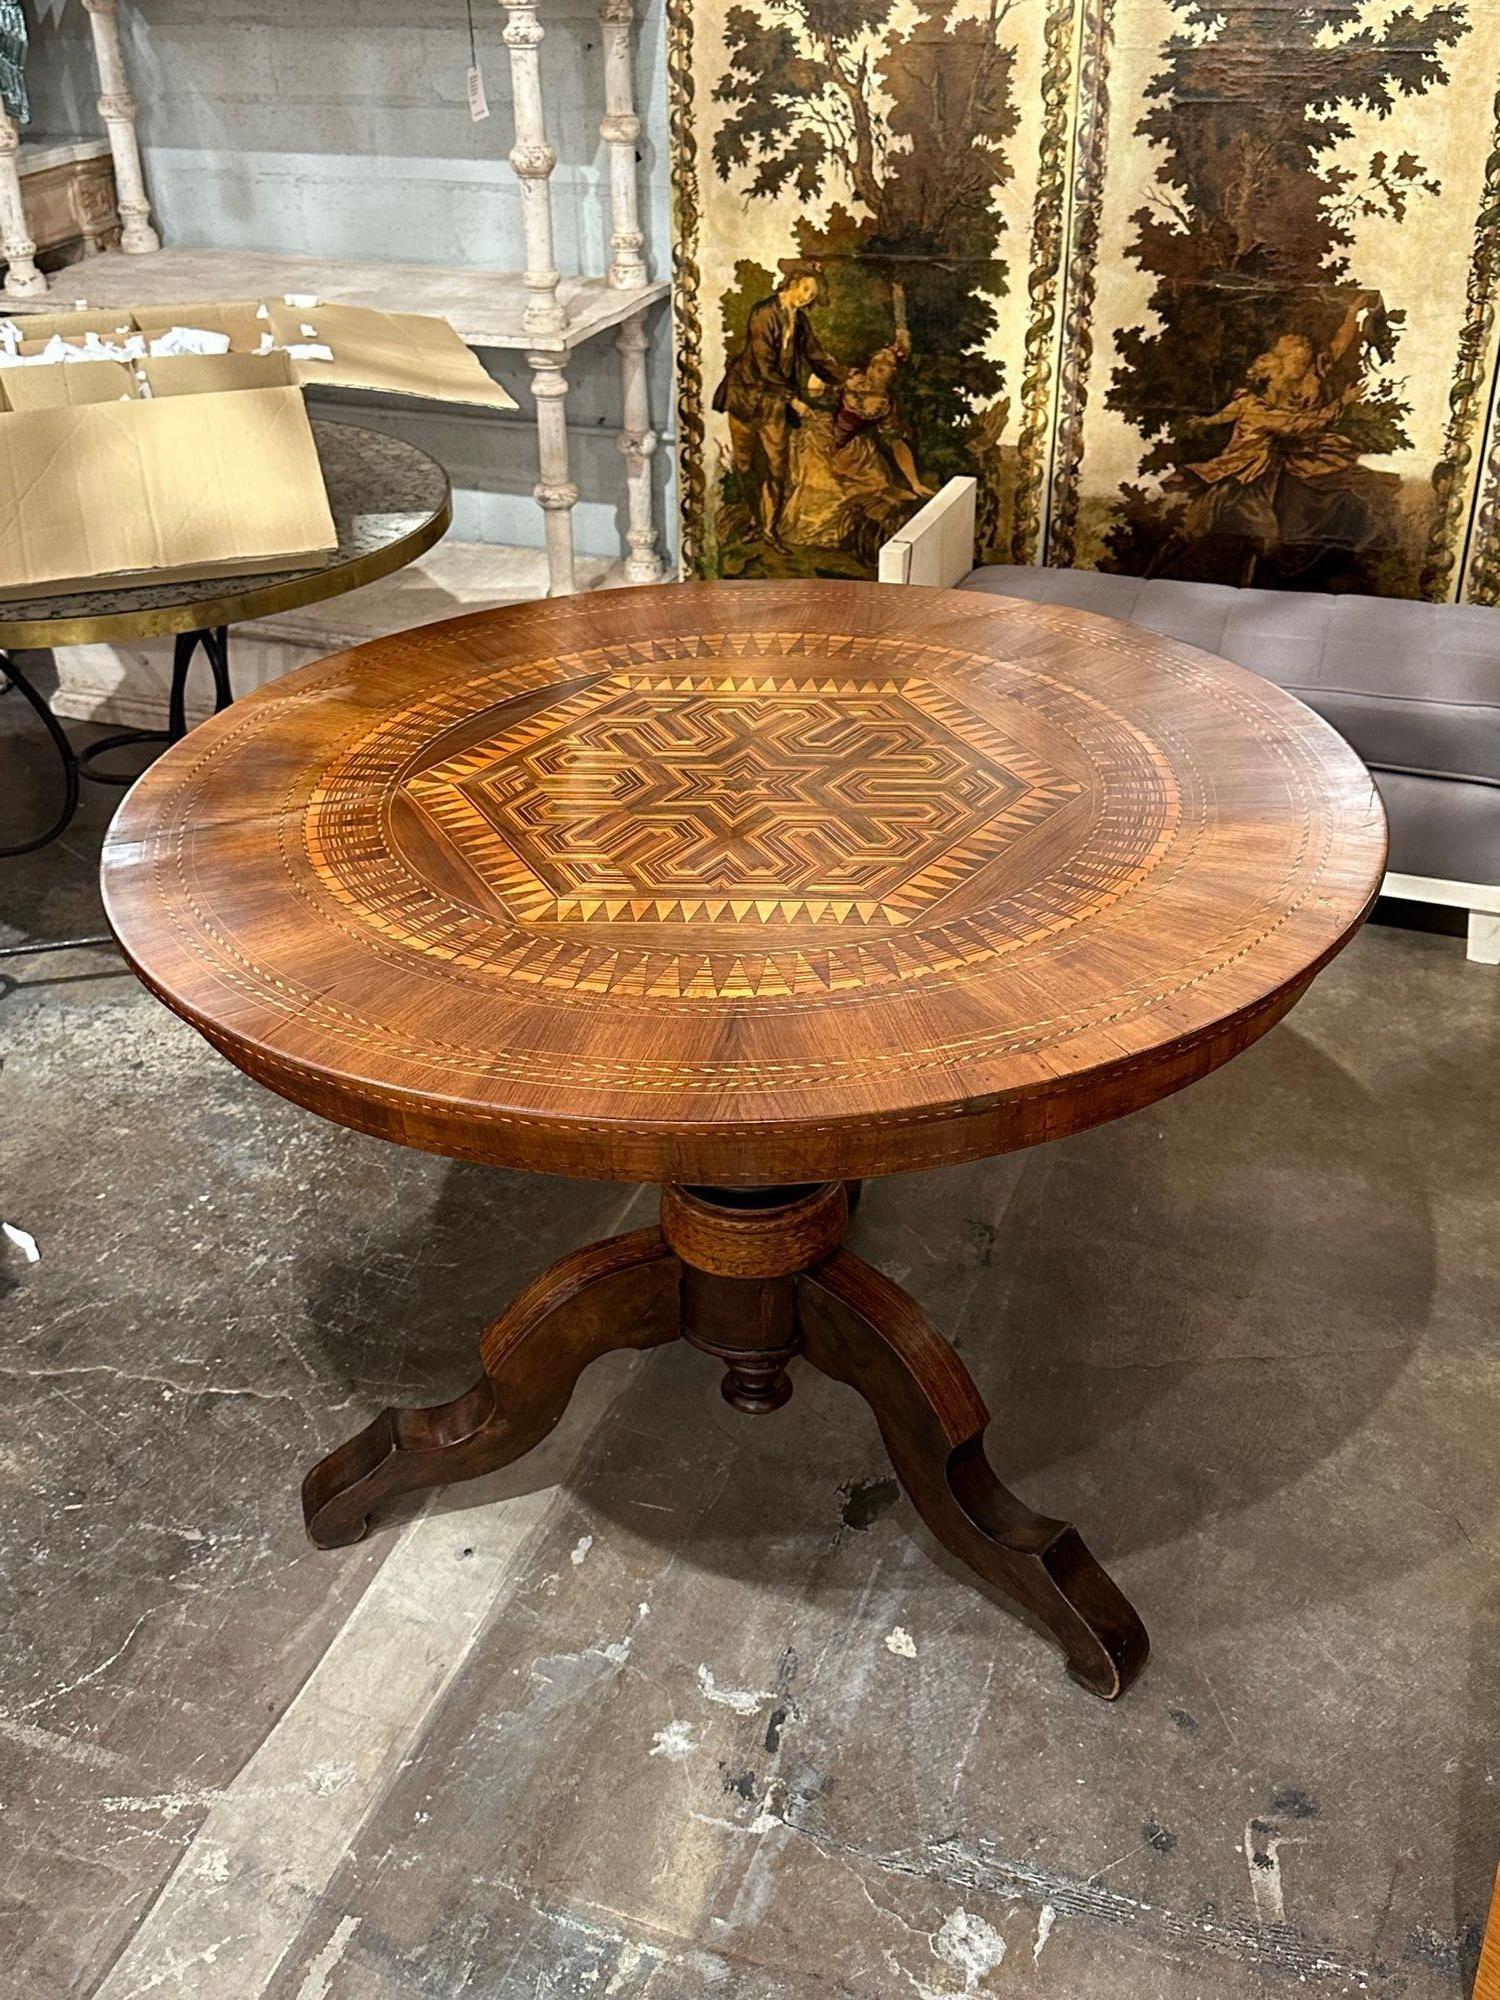 19th century Italian inlaid walnut center table from Sorento, circa 1870. A timeless and Classic touch for a fine interior.